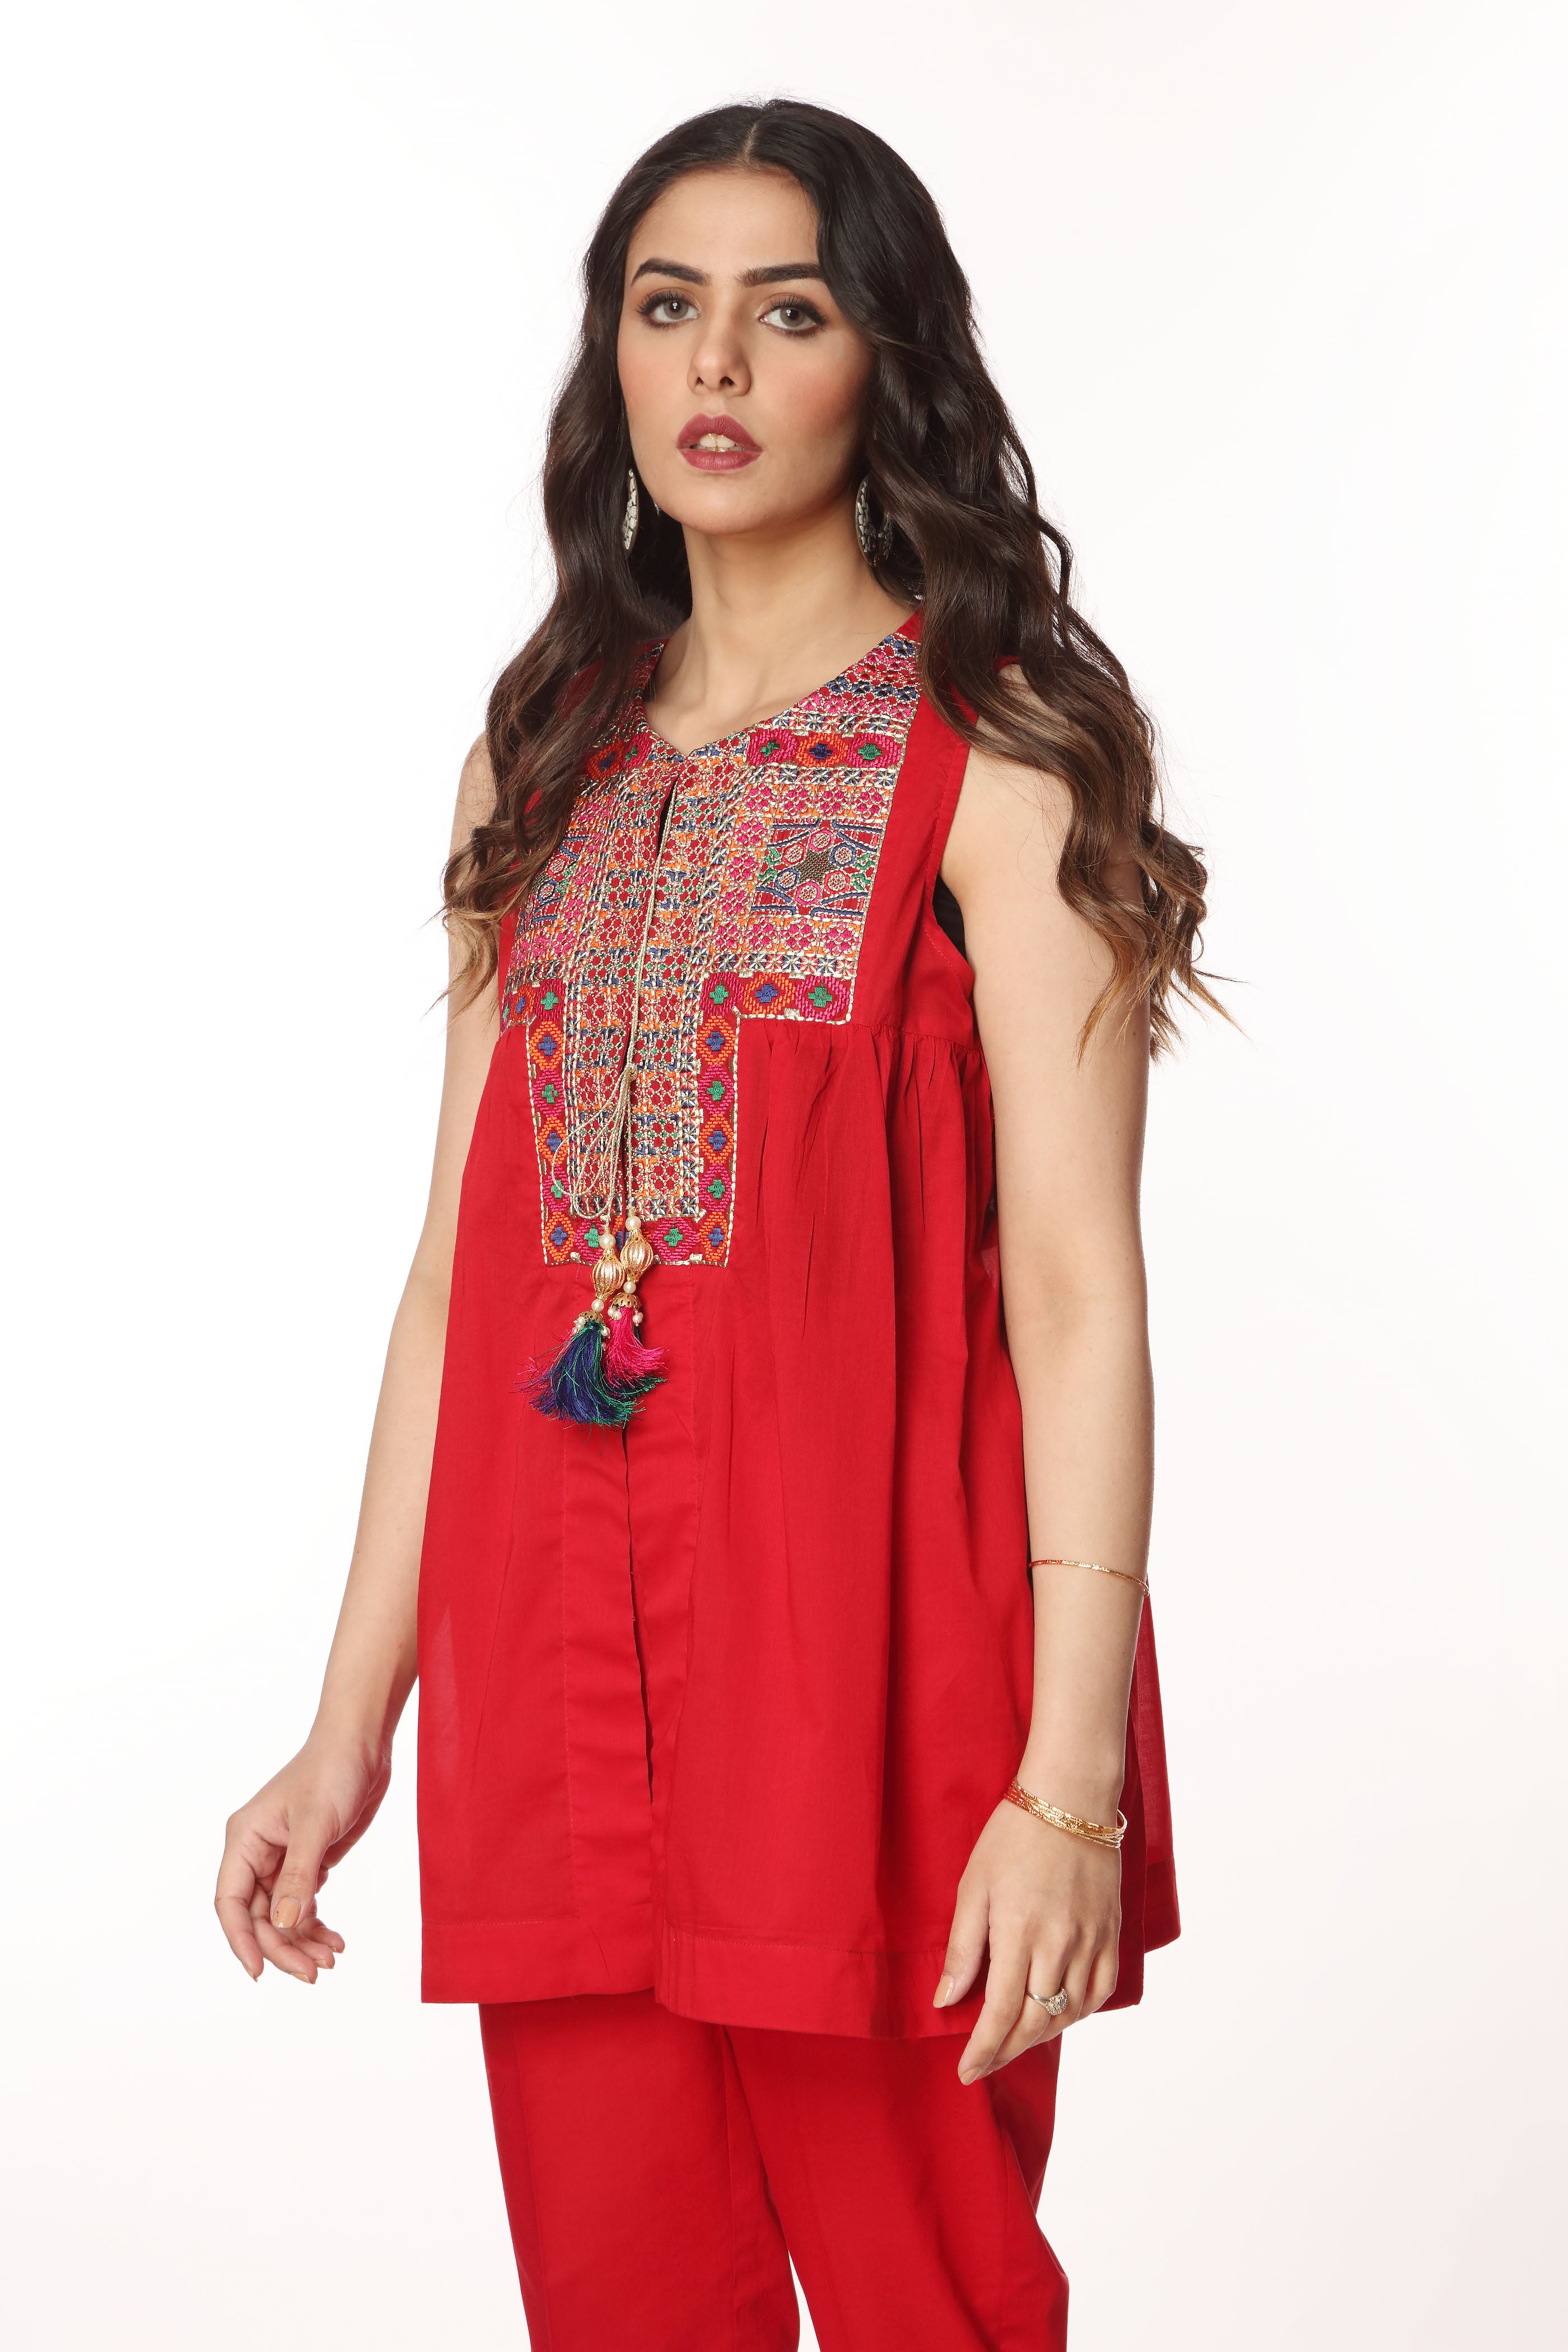 Tilla Shrug in Red coloured Printed Lawn fabric 2